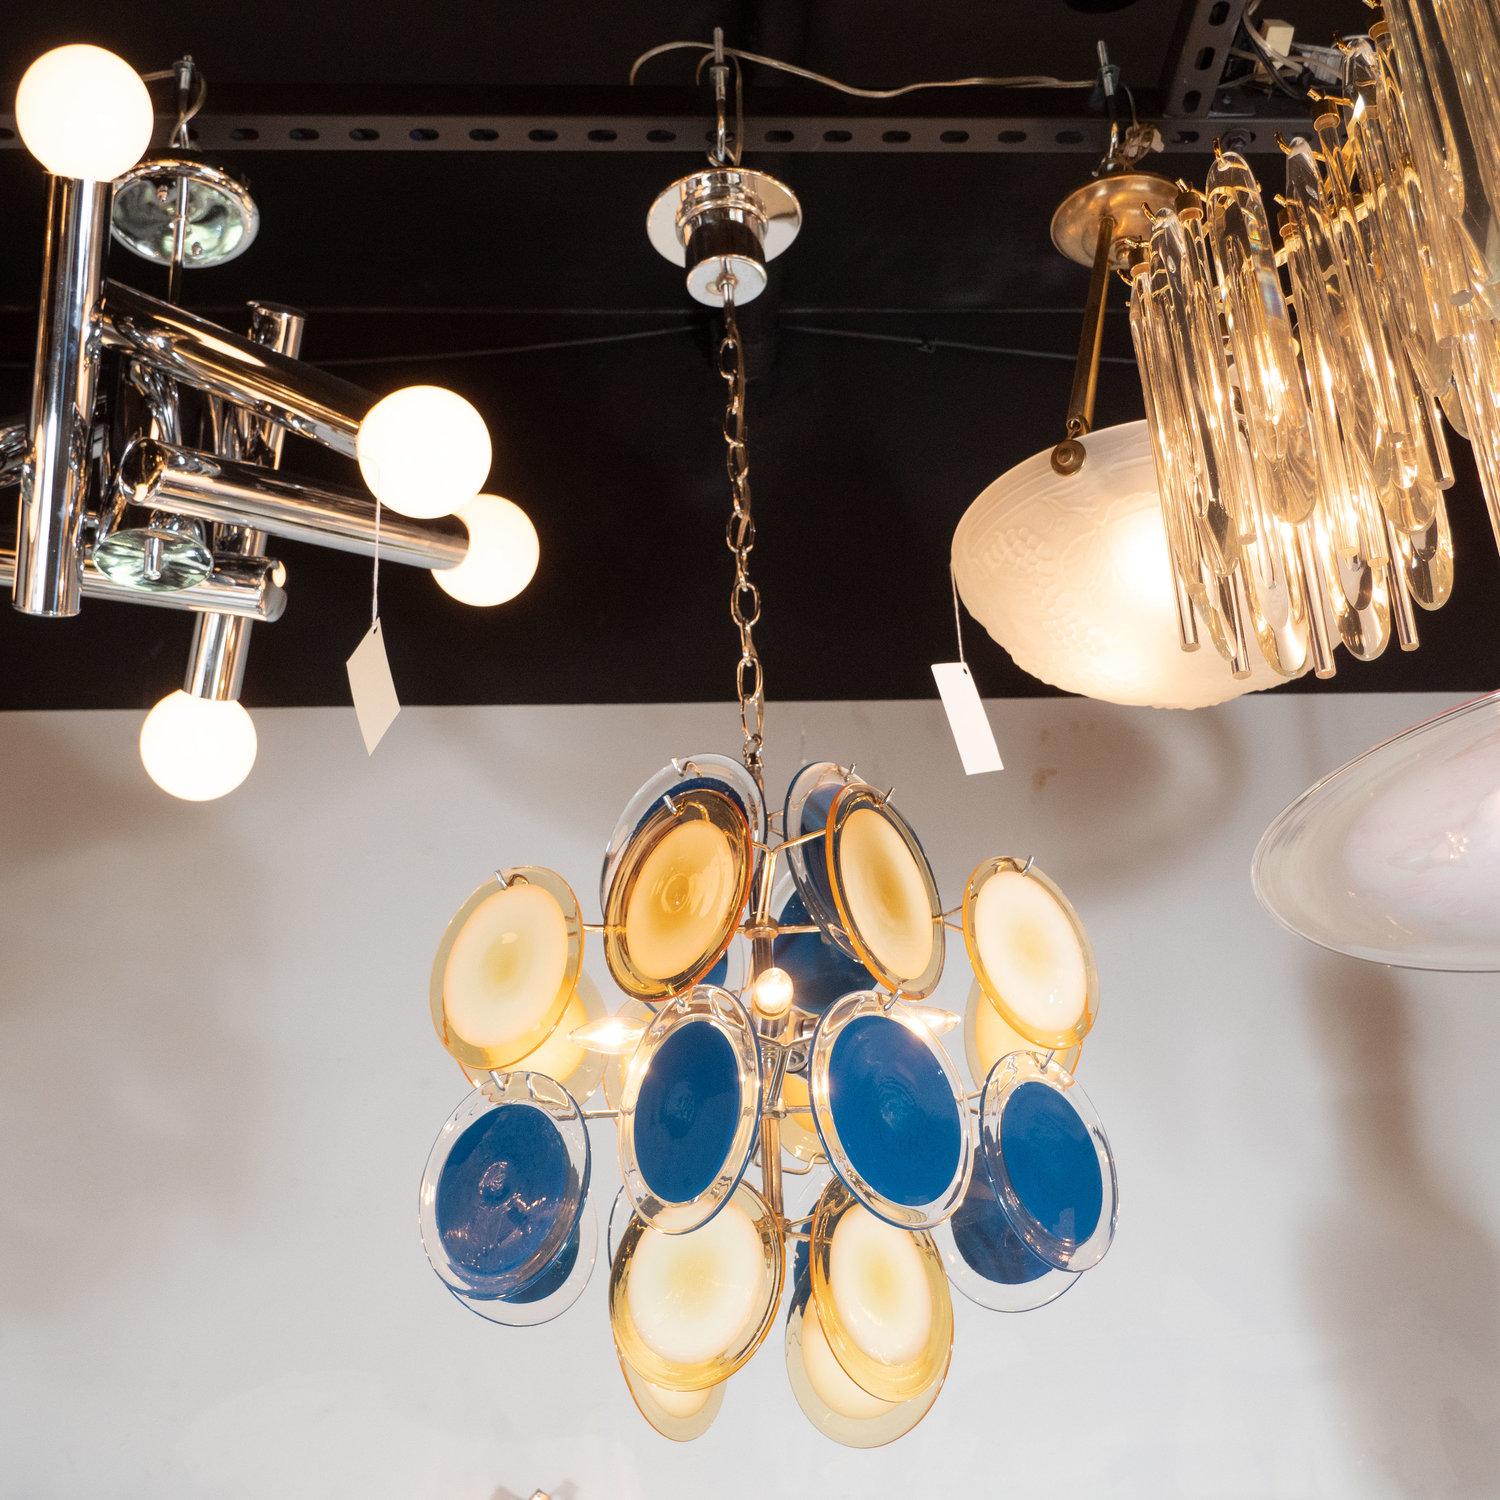 This sophisticated and vibrant chandelier was realized in Murano, Italy- the islands off the coast of Venice renowned for centuries for their superlative glass production. It features an abundance of handblown cerulean and straw yellow hued discs